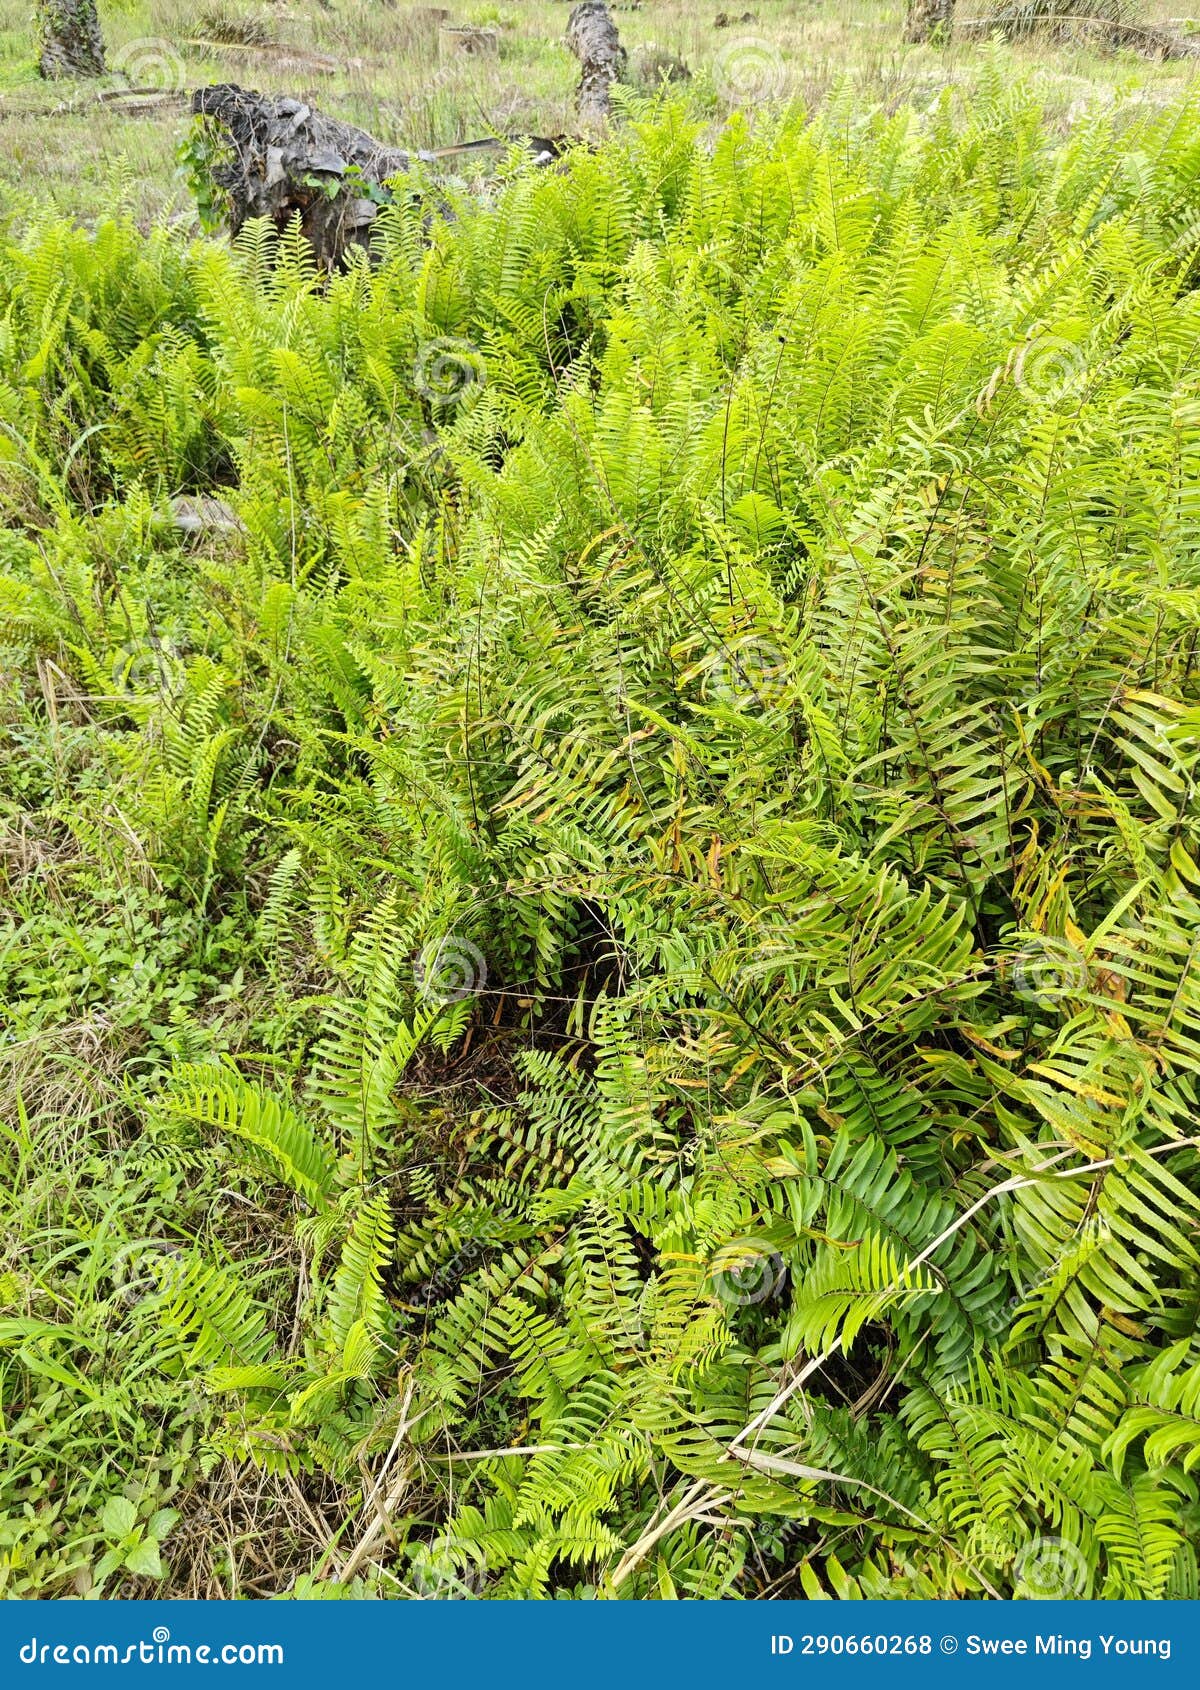 types of ferns leaves plants found in the plantation.